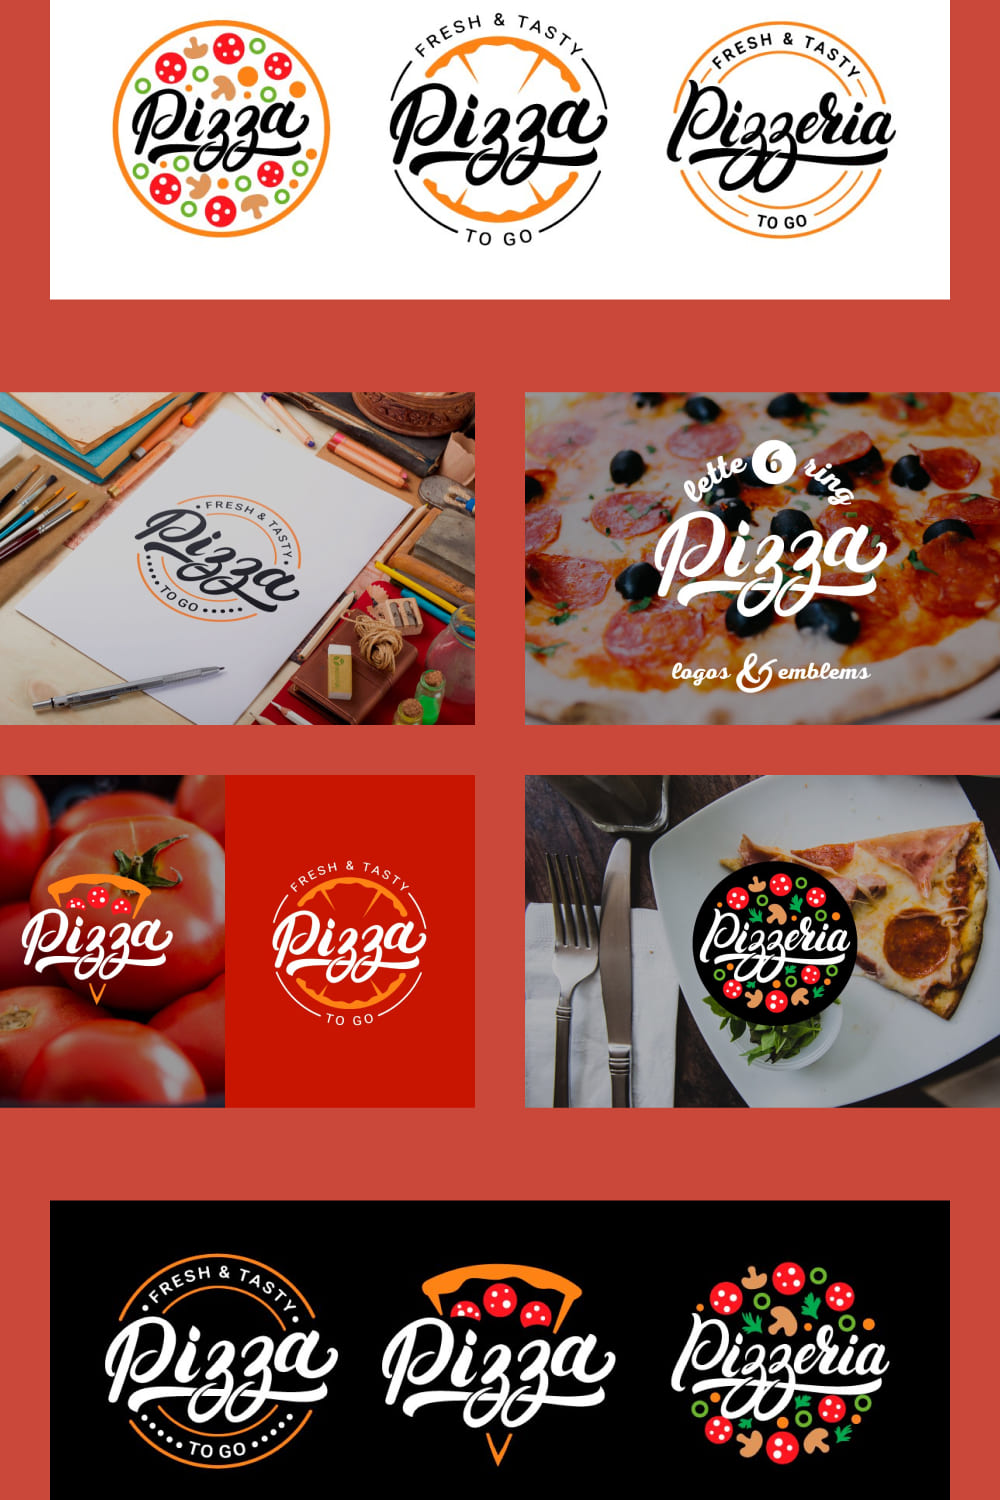 This is a set of hand written lettering Pizza and Pizzeria logos.